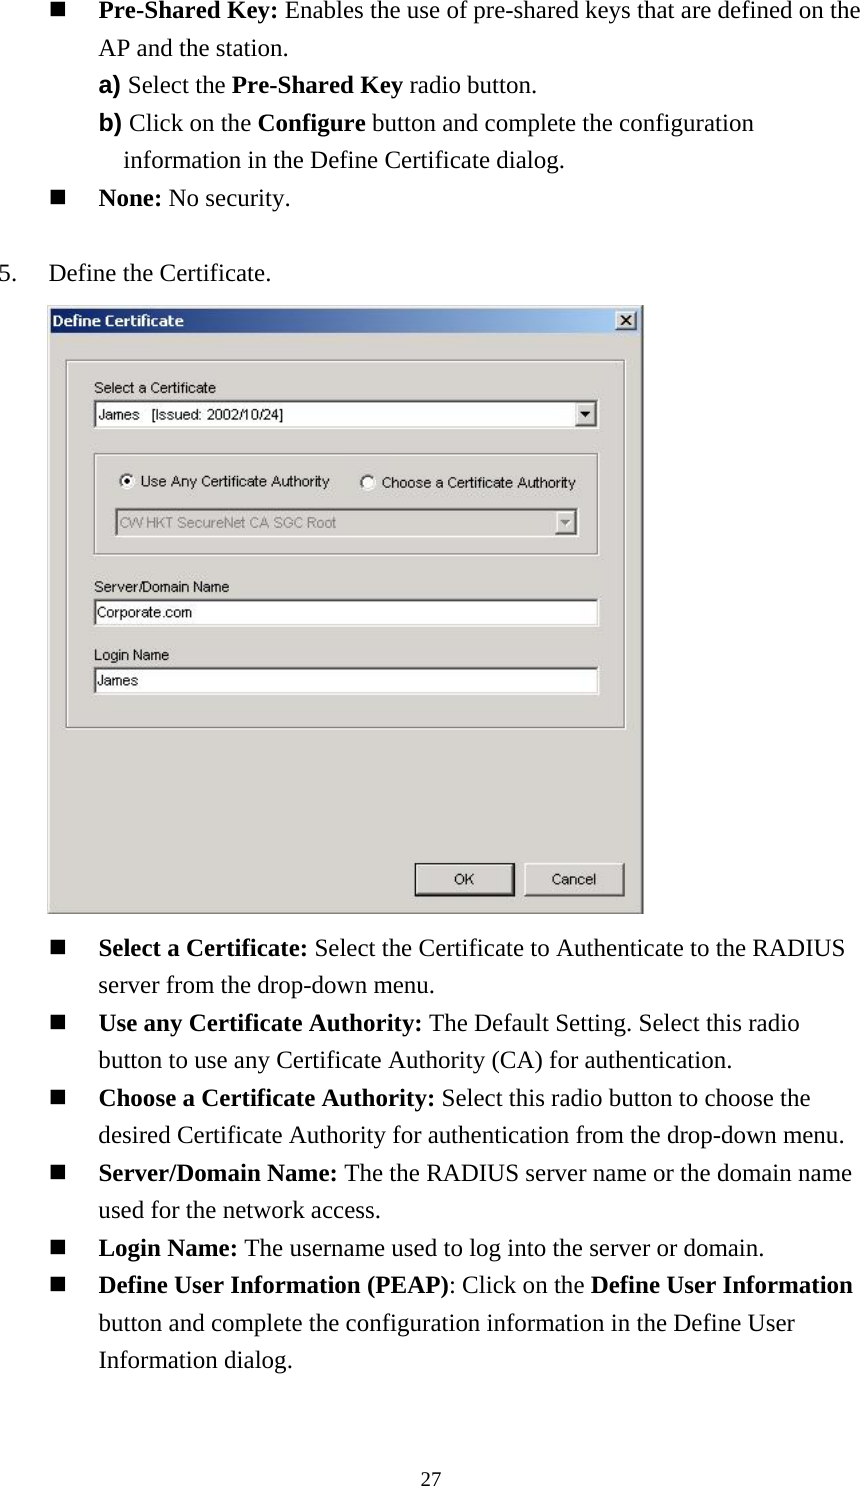  27 Pre-Shared Key: Enables the use of pre-shared keys that are defined on the AP and the station. a) Select the Pre-Shared Key radio button. b) Click on the Configure button and complete the configuration information in the Define Certificate dialog.  None: No security.  5.    Define the Certificate.        Select a Certificate: Select the Certificate to Authenticate to the RADIUS server from the drop-down menu.  Use any Certificate Authority: The Default Setting. Select this radio button to use any Certificate Authority (CA) for authentication.  Choose a Certificate Authority: Select this radio button to choose the desired Certificate Authority for authentication from the drop-down menu.  Server/Domain Name: The the RADIUS server name or the domain name used for the network access.  Login Name: The username used to log into the server or domain.  Define User Information (PEAP): Click on the Define User Information button and complete the configuration information in the Define User Information dialog.  